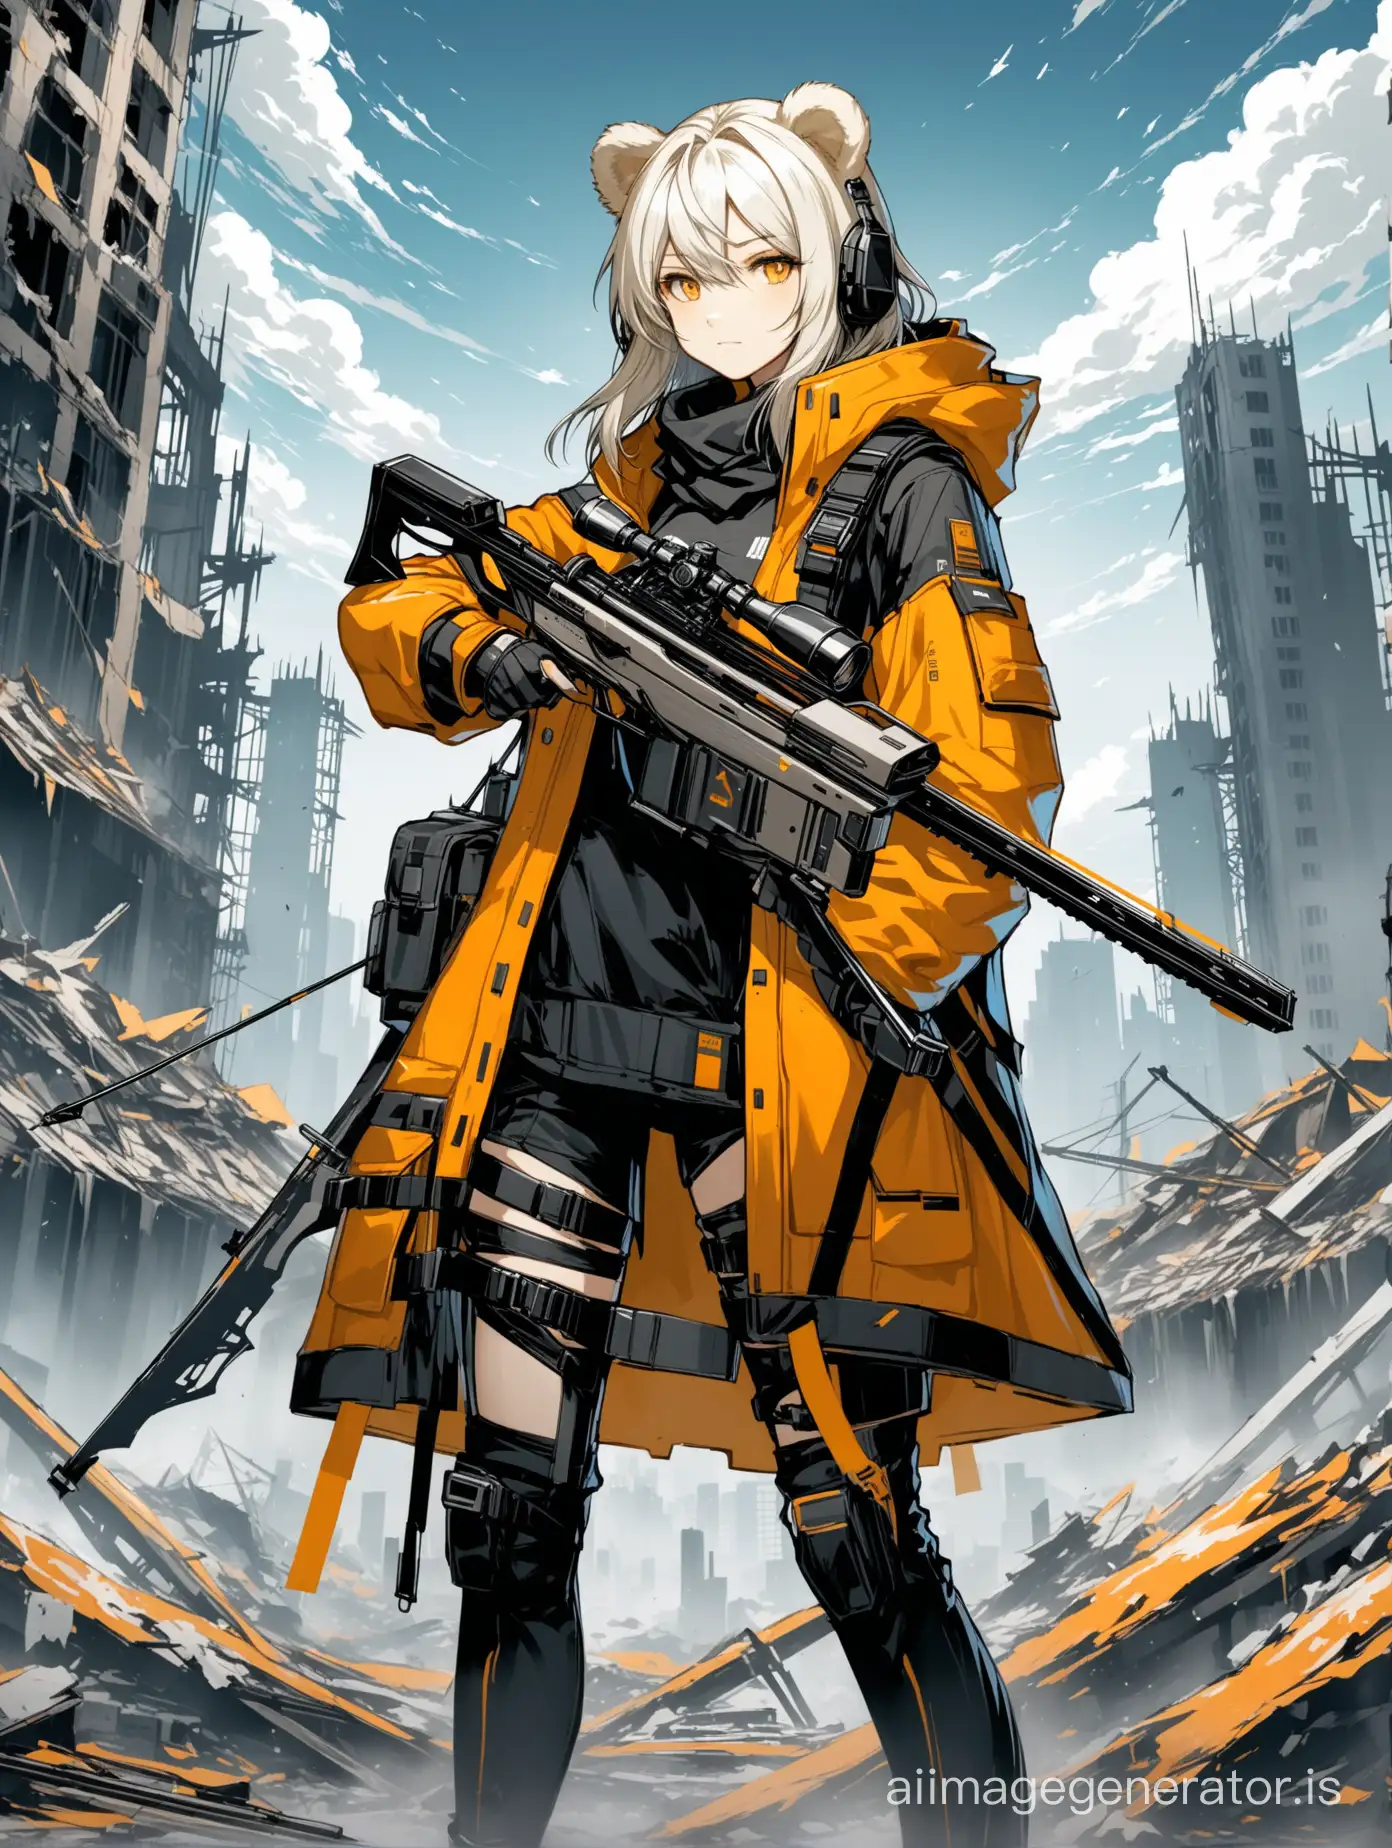 Ursus-Girl-with-Crossbow-Amidst-Ruined-Cityscape